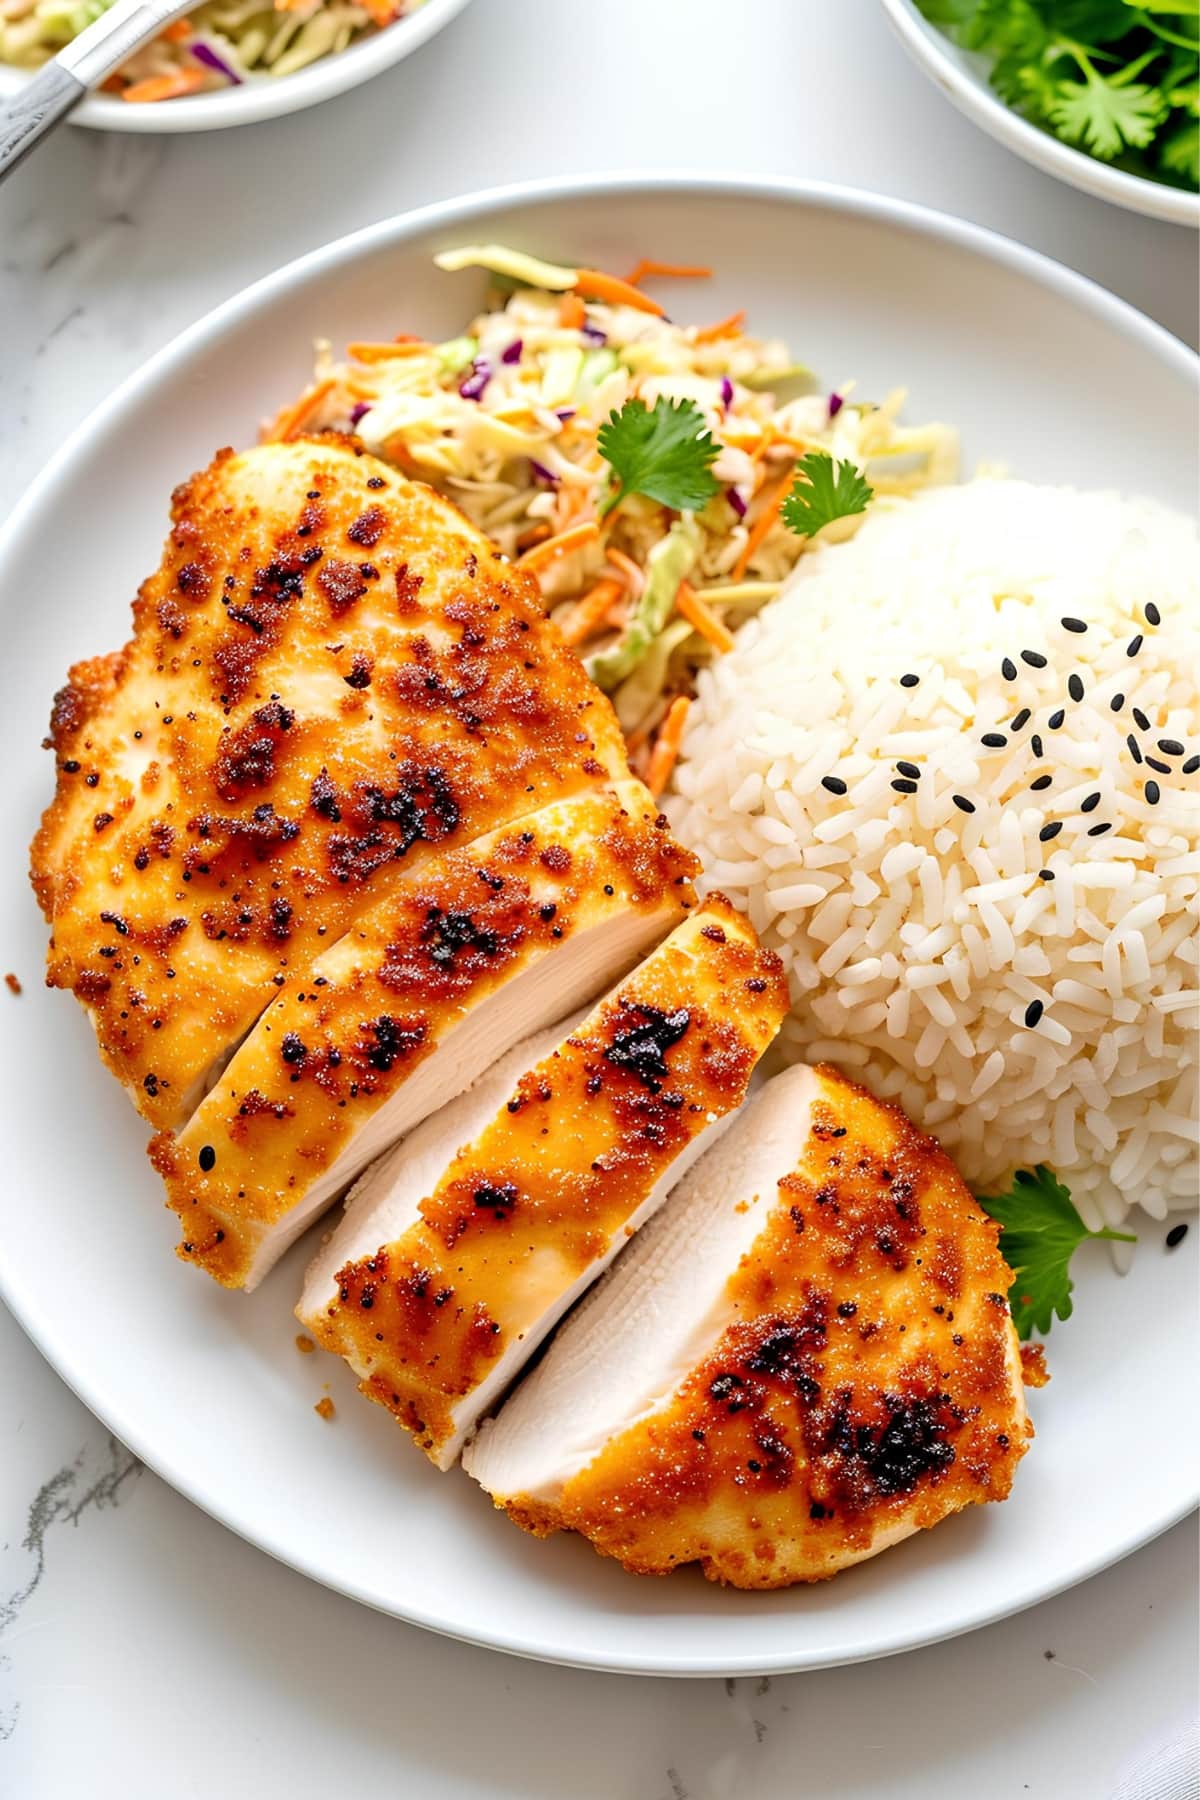 Tender and juicy chicken breast served with coleslaw and white rice in a plate